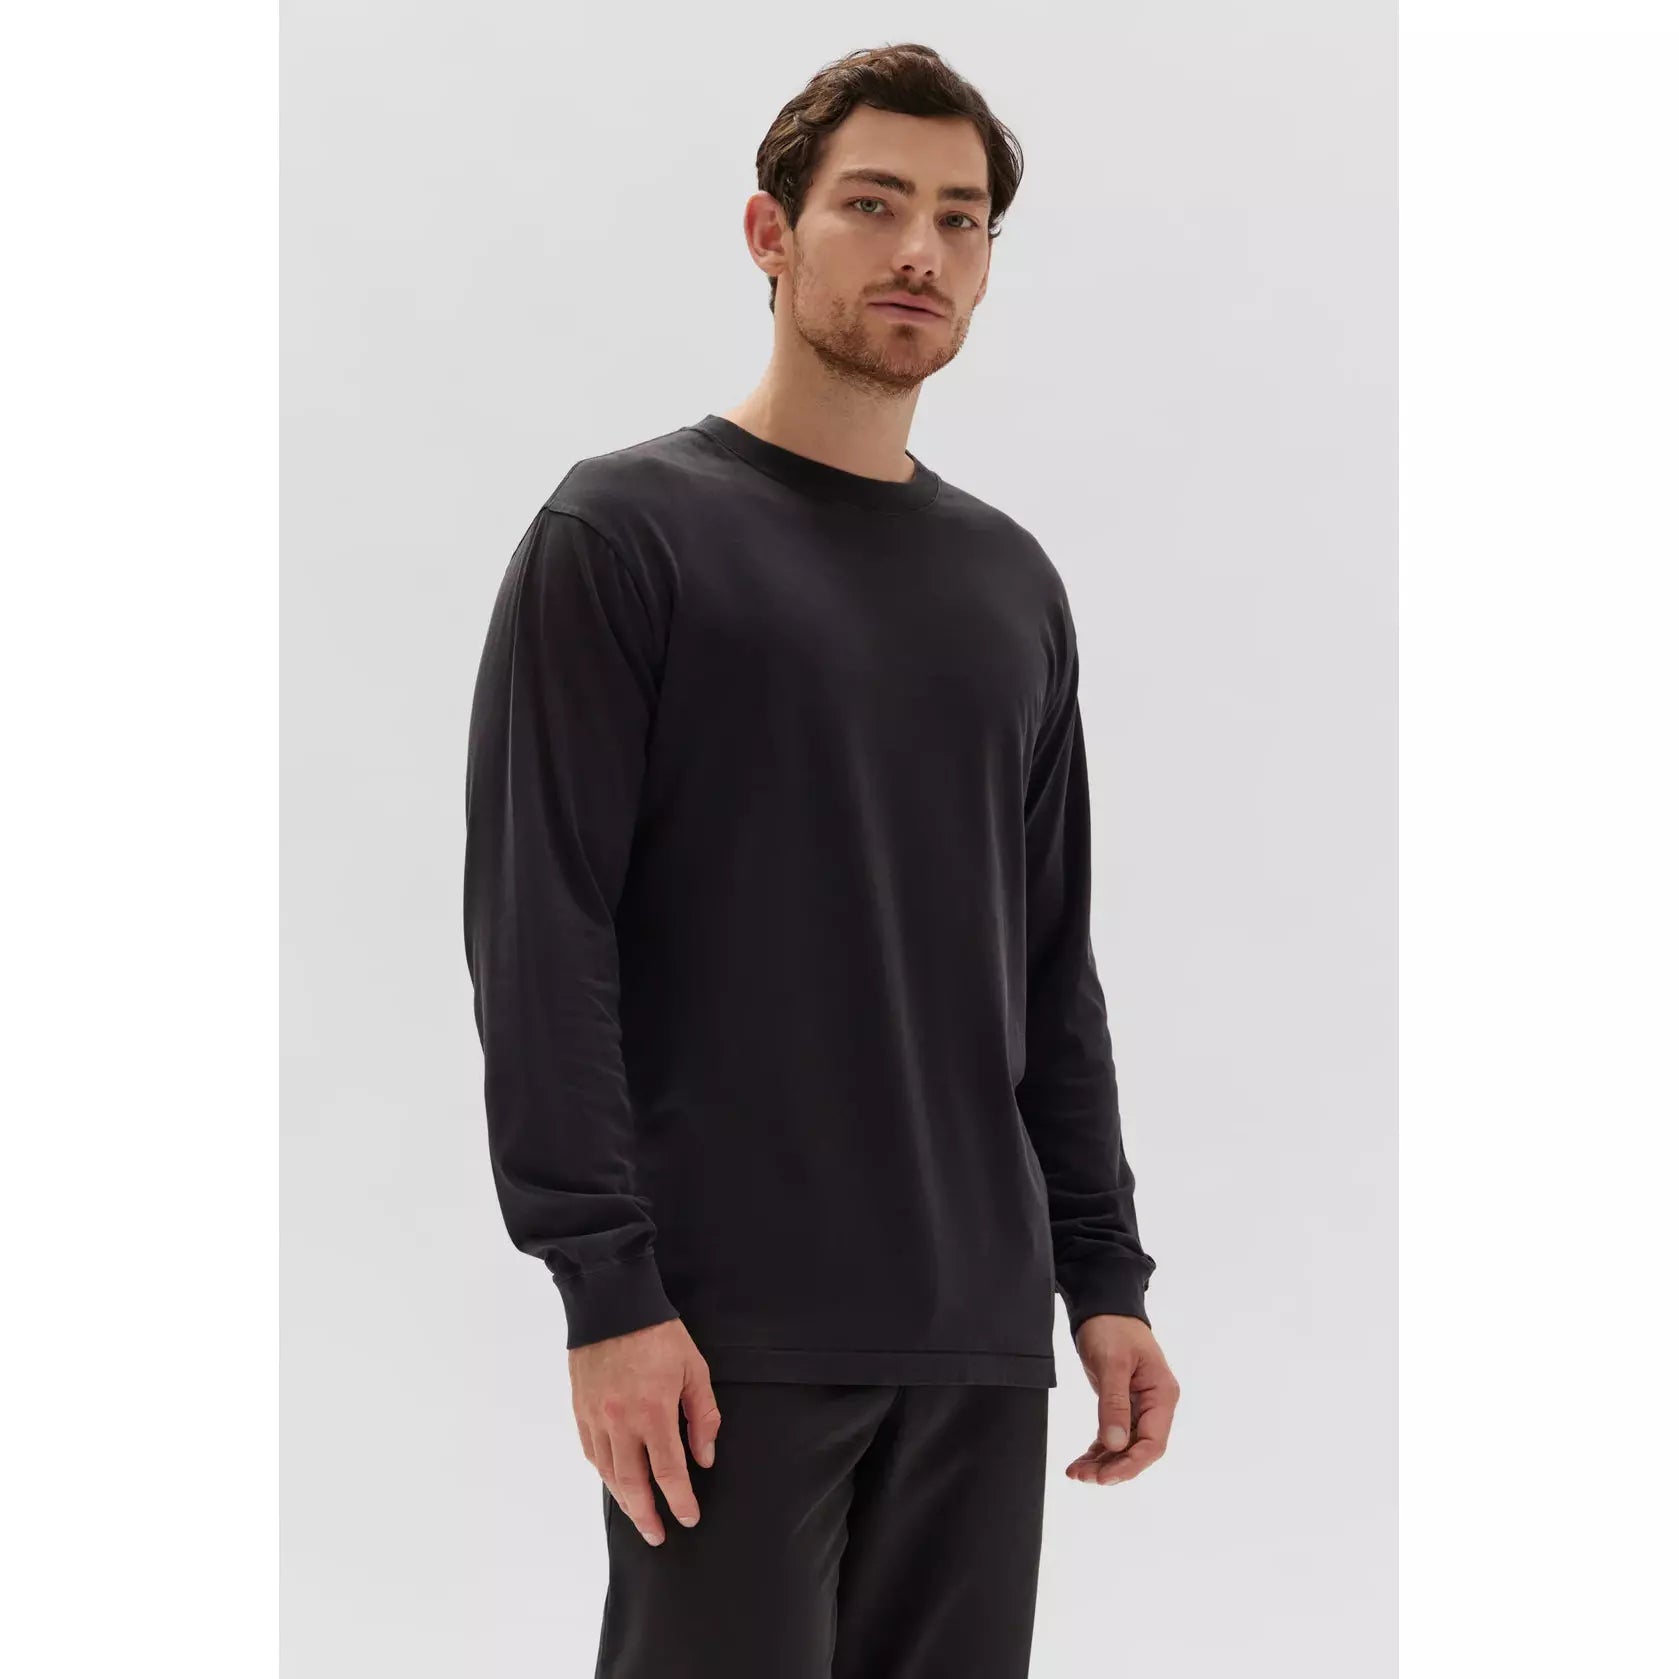 Assembly Label Men's Kylo Organic Cuffed Long Sleeve Tee - Washed Black